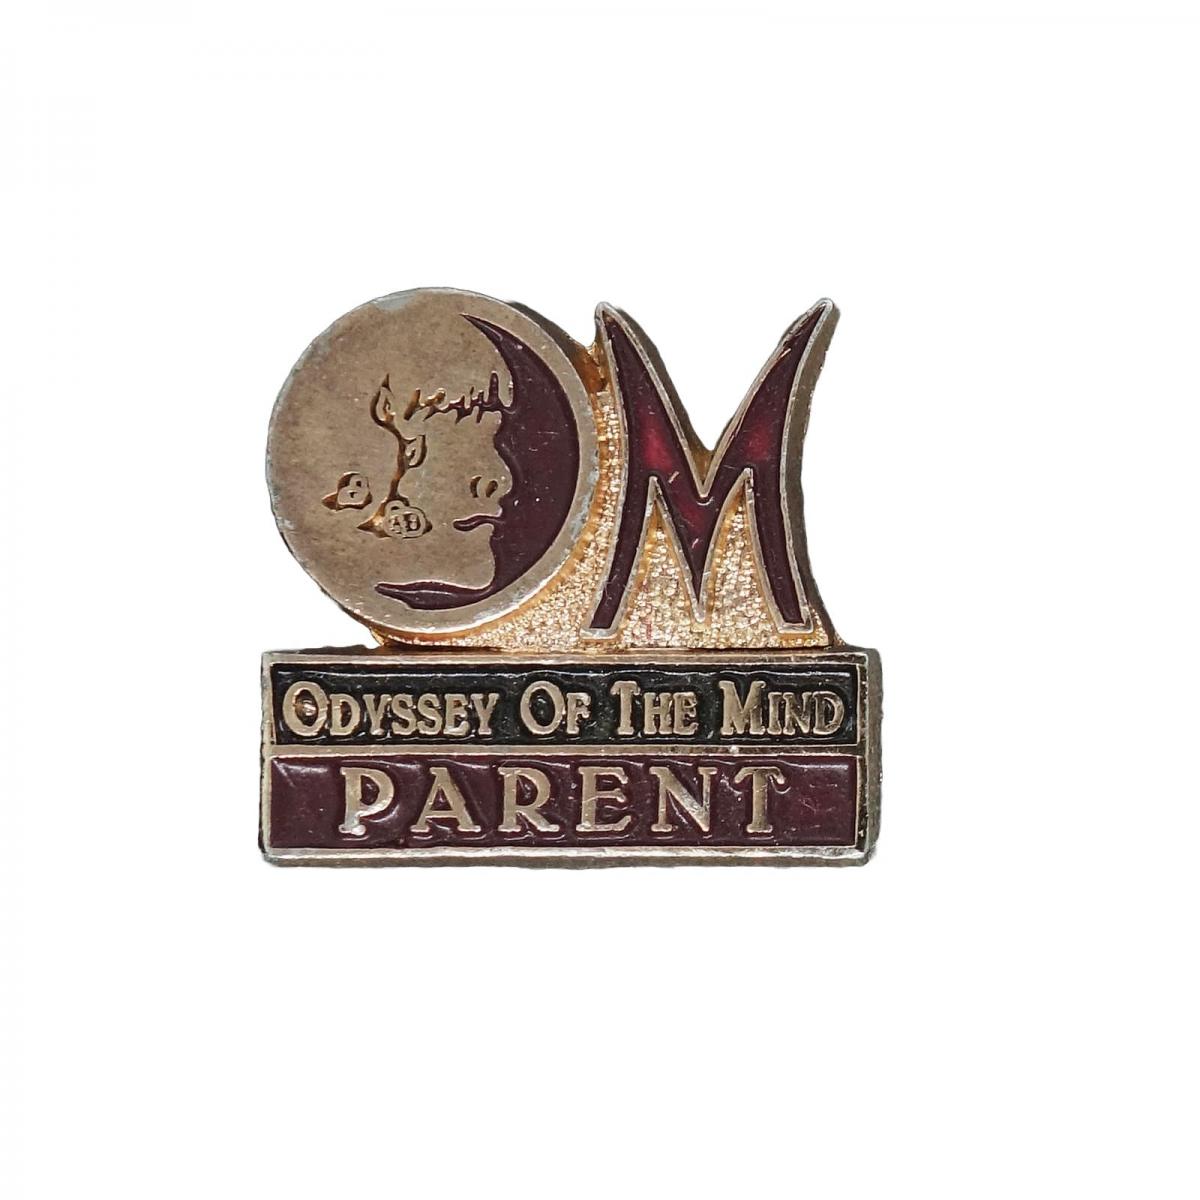 ODYSSEY OF THE MIND ピンズ PARENT 留め具付き